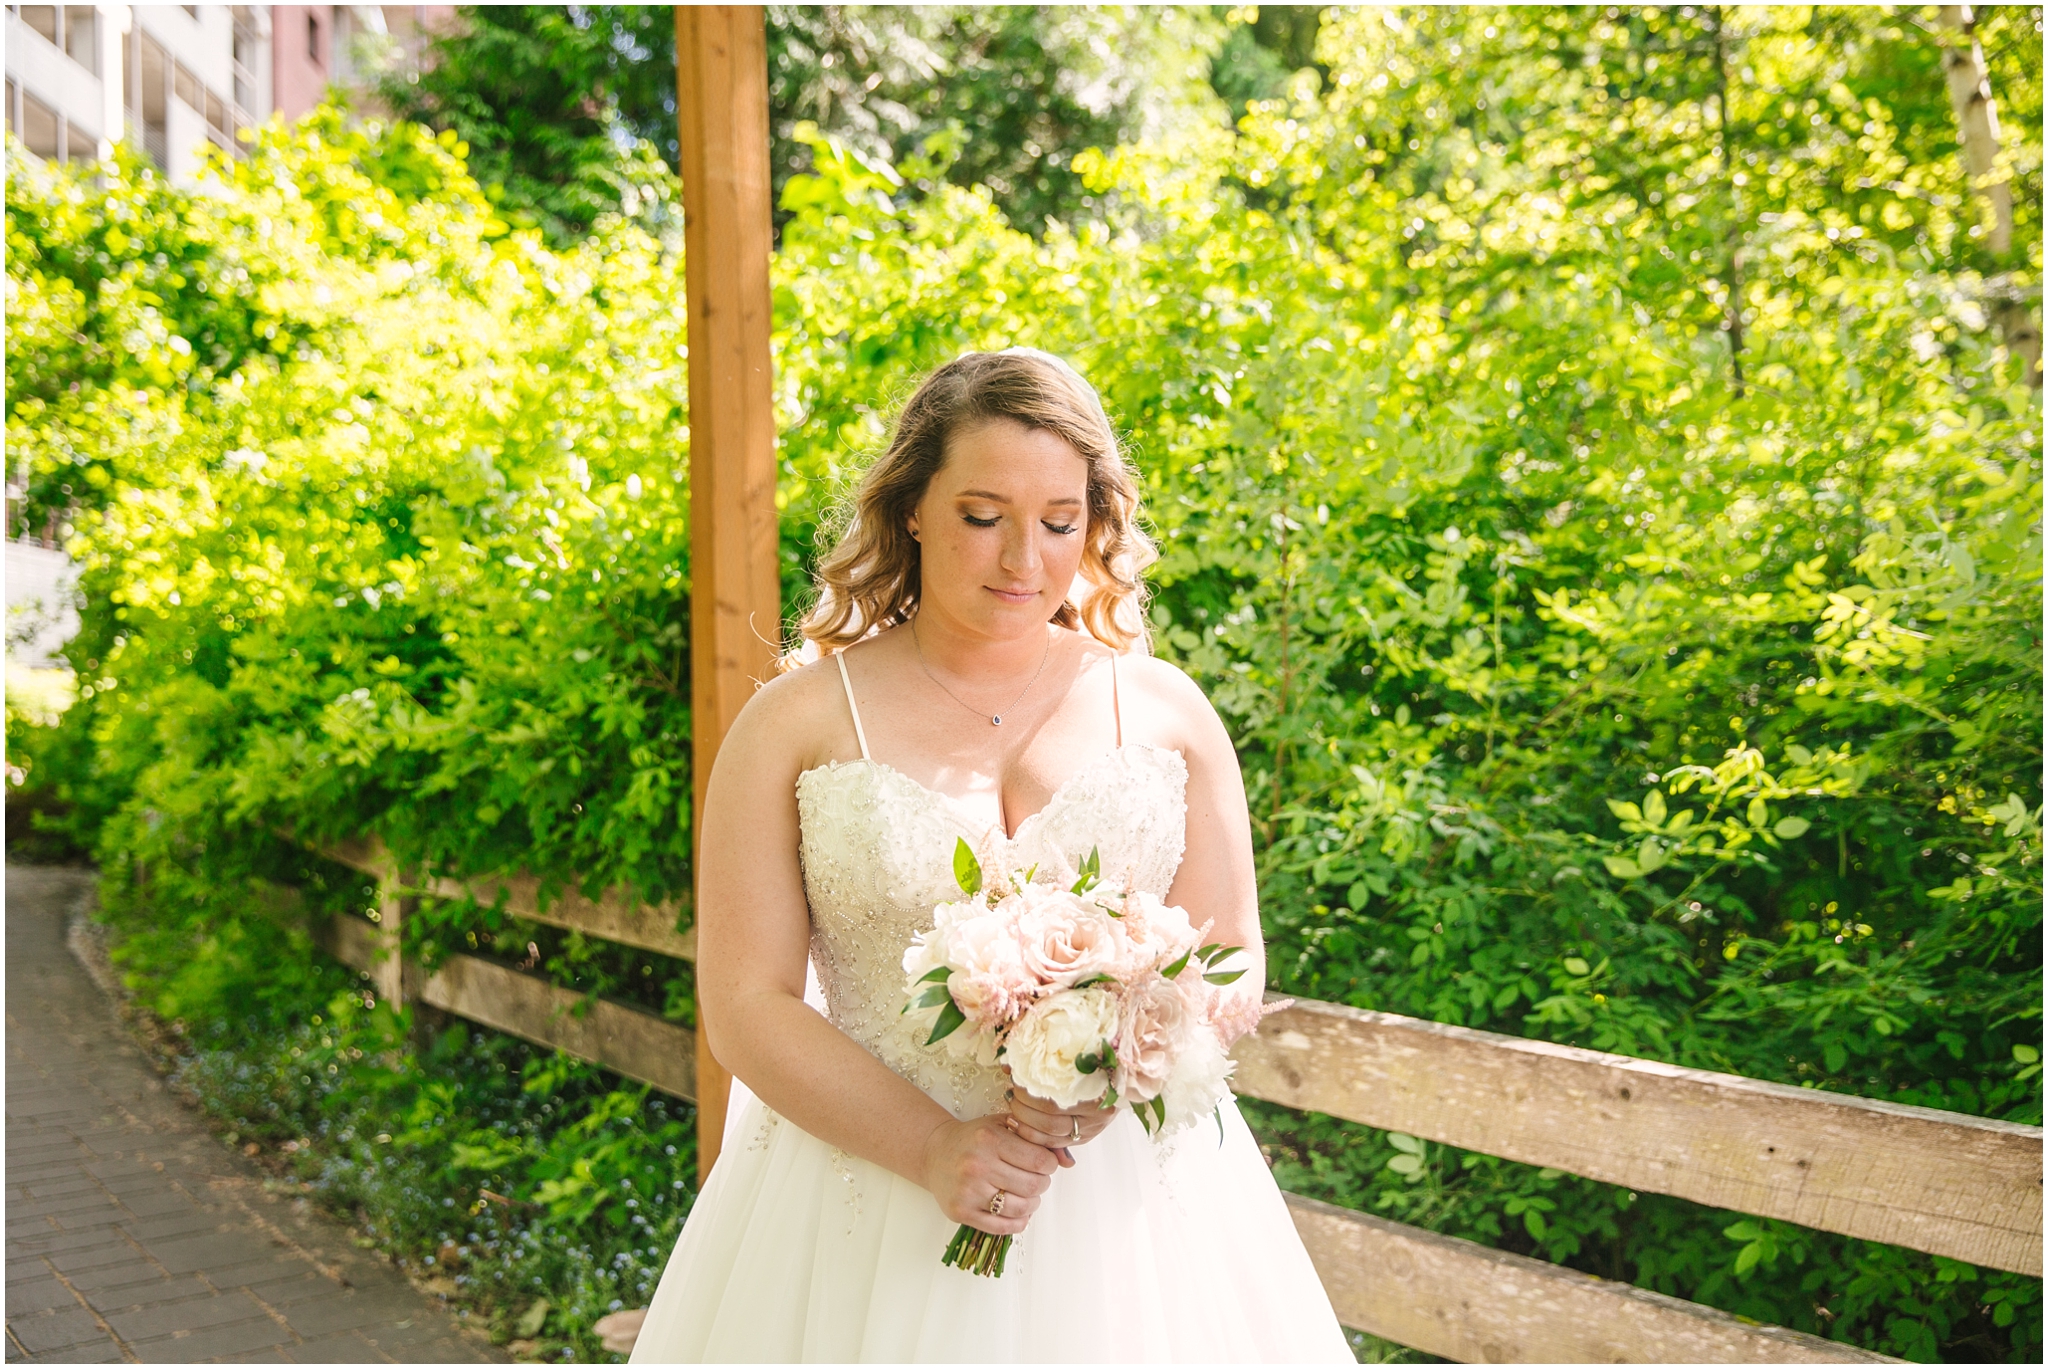 Bride with pink peony bouquet at Pickering Barn wedding in Issaquah Washington